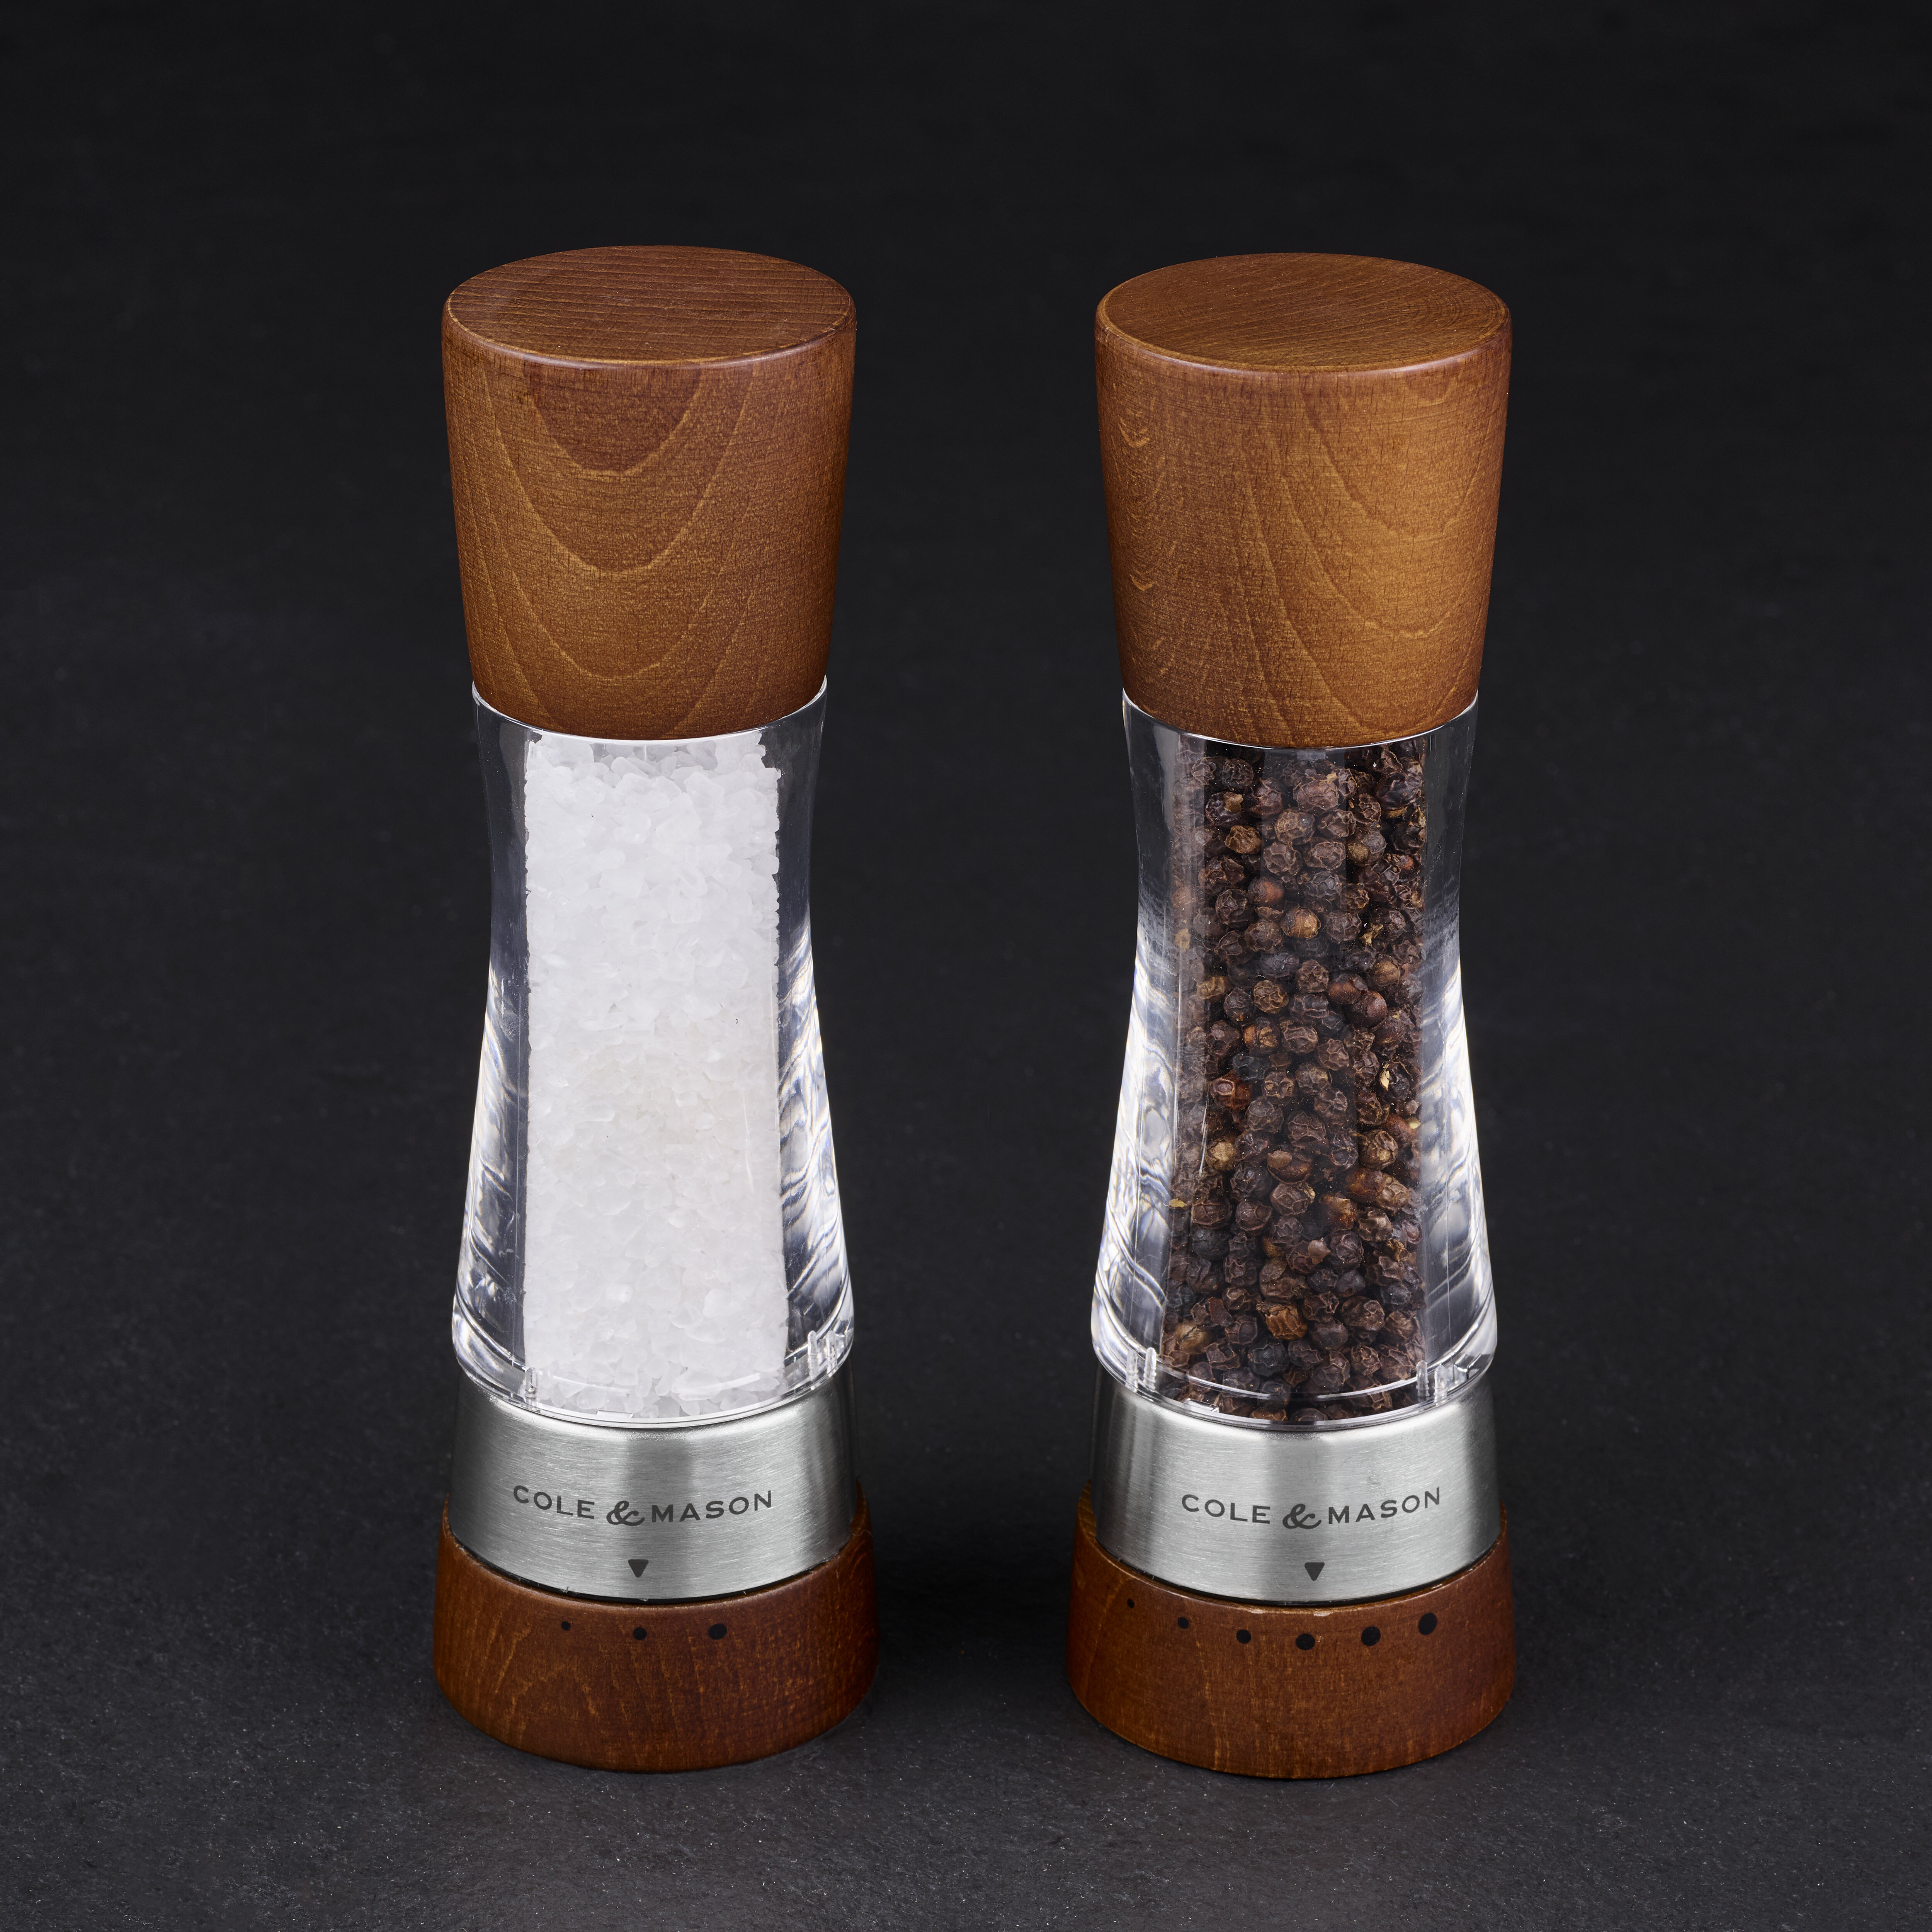 Salt and Pepper Grinder Set - Stainless Steel Pepper Grinder and Salt Grinder with Tray in Luxurious Gift-Box - Manual Mills with Ceramic Grinders